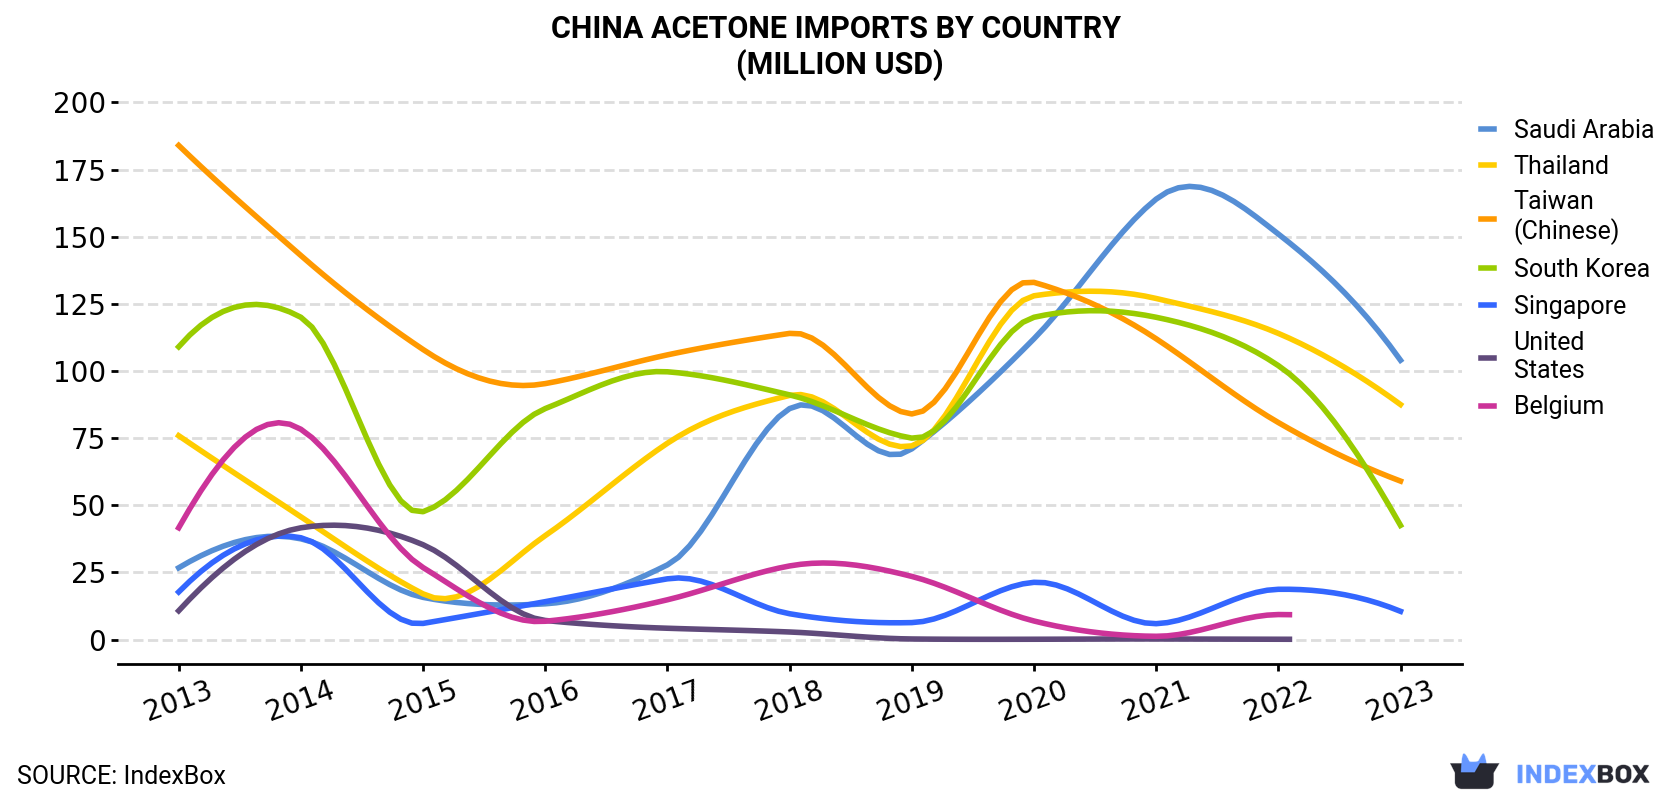 China Acetone Imports By Country (Million USD)